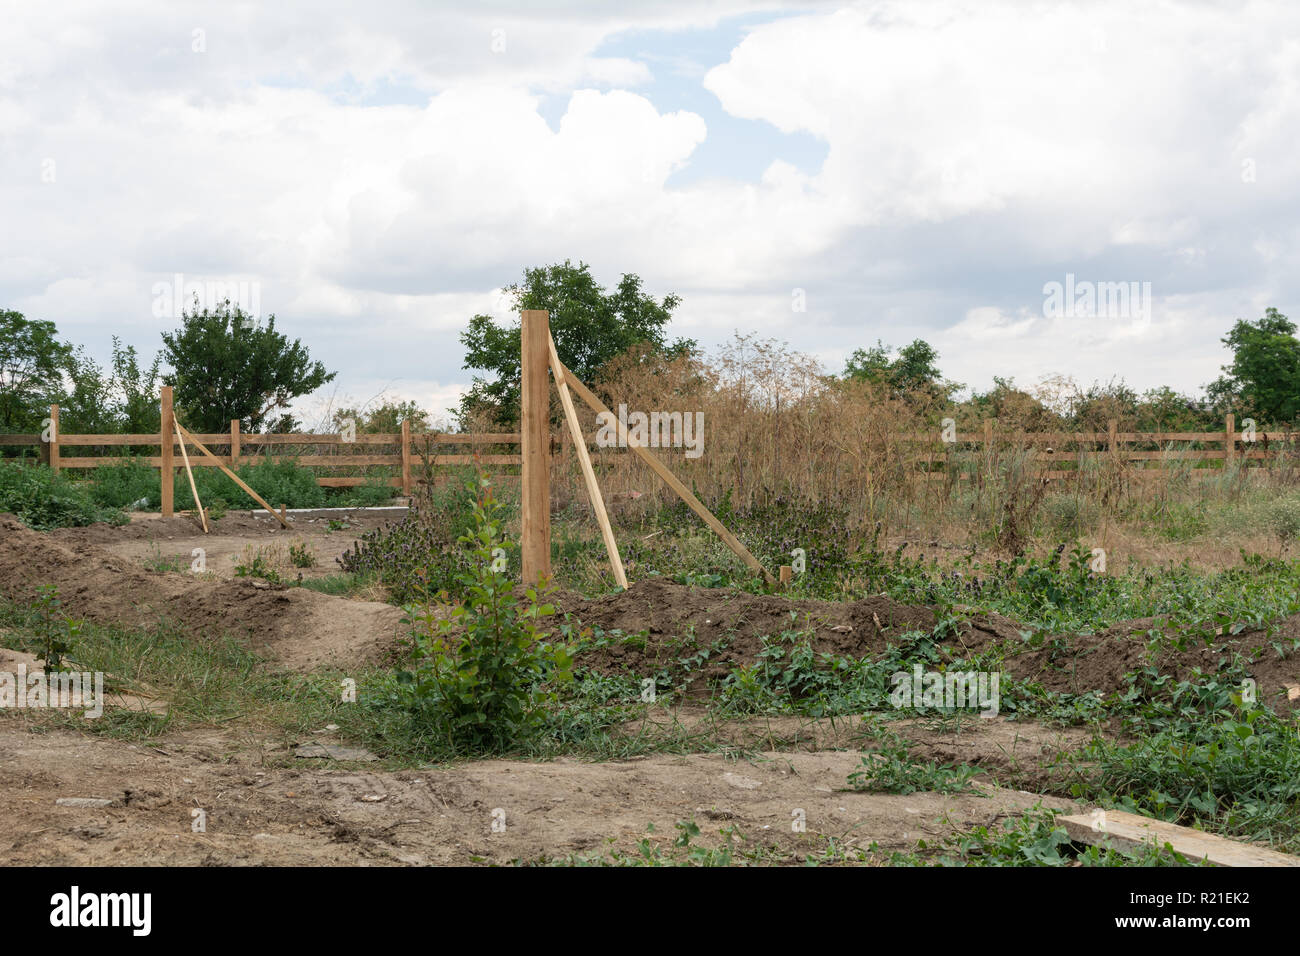 Support fence. Construction of a wooden rural fence. Stock Photo